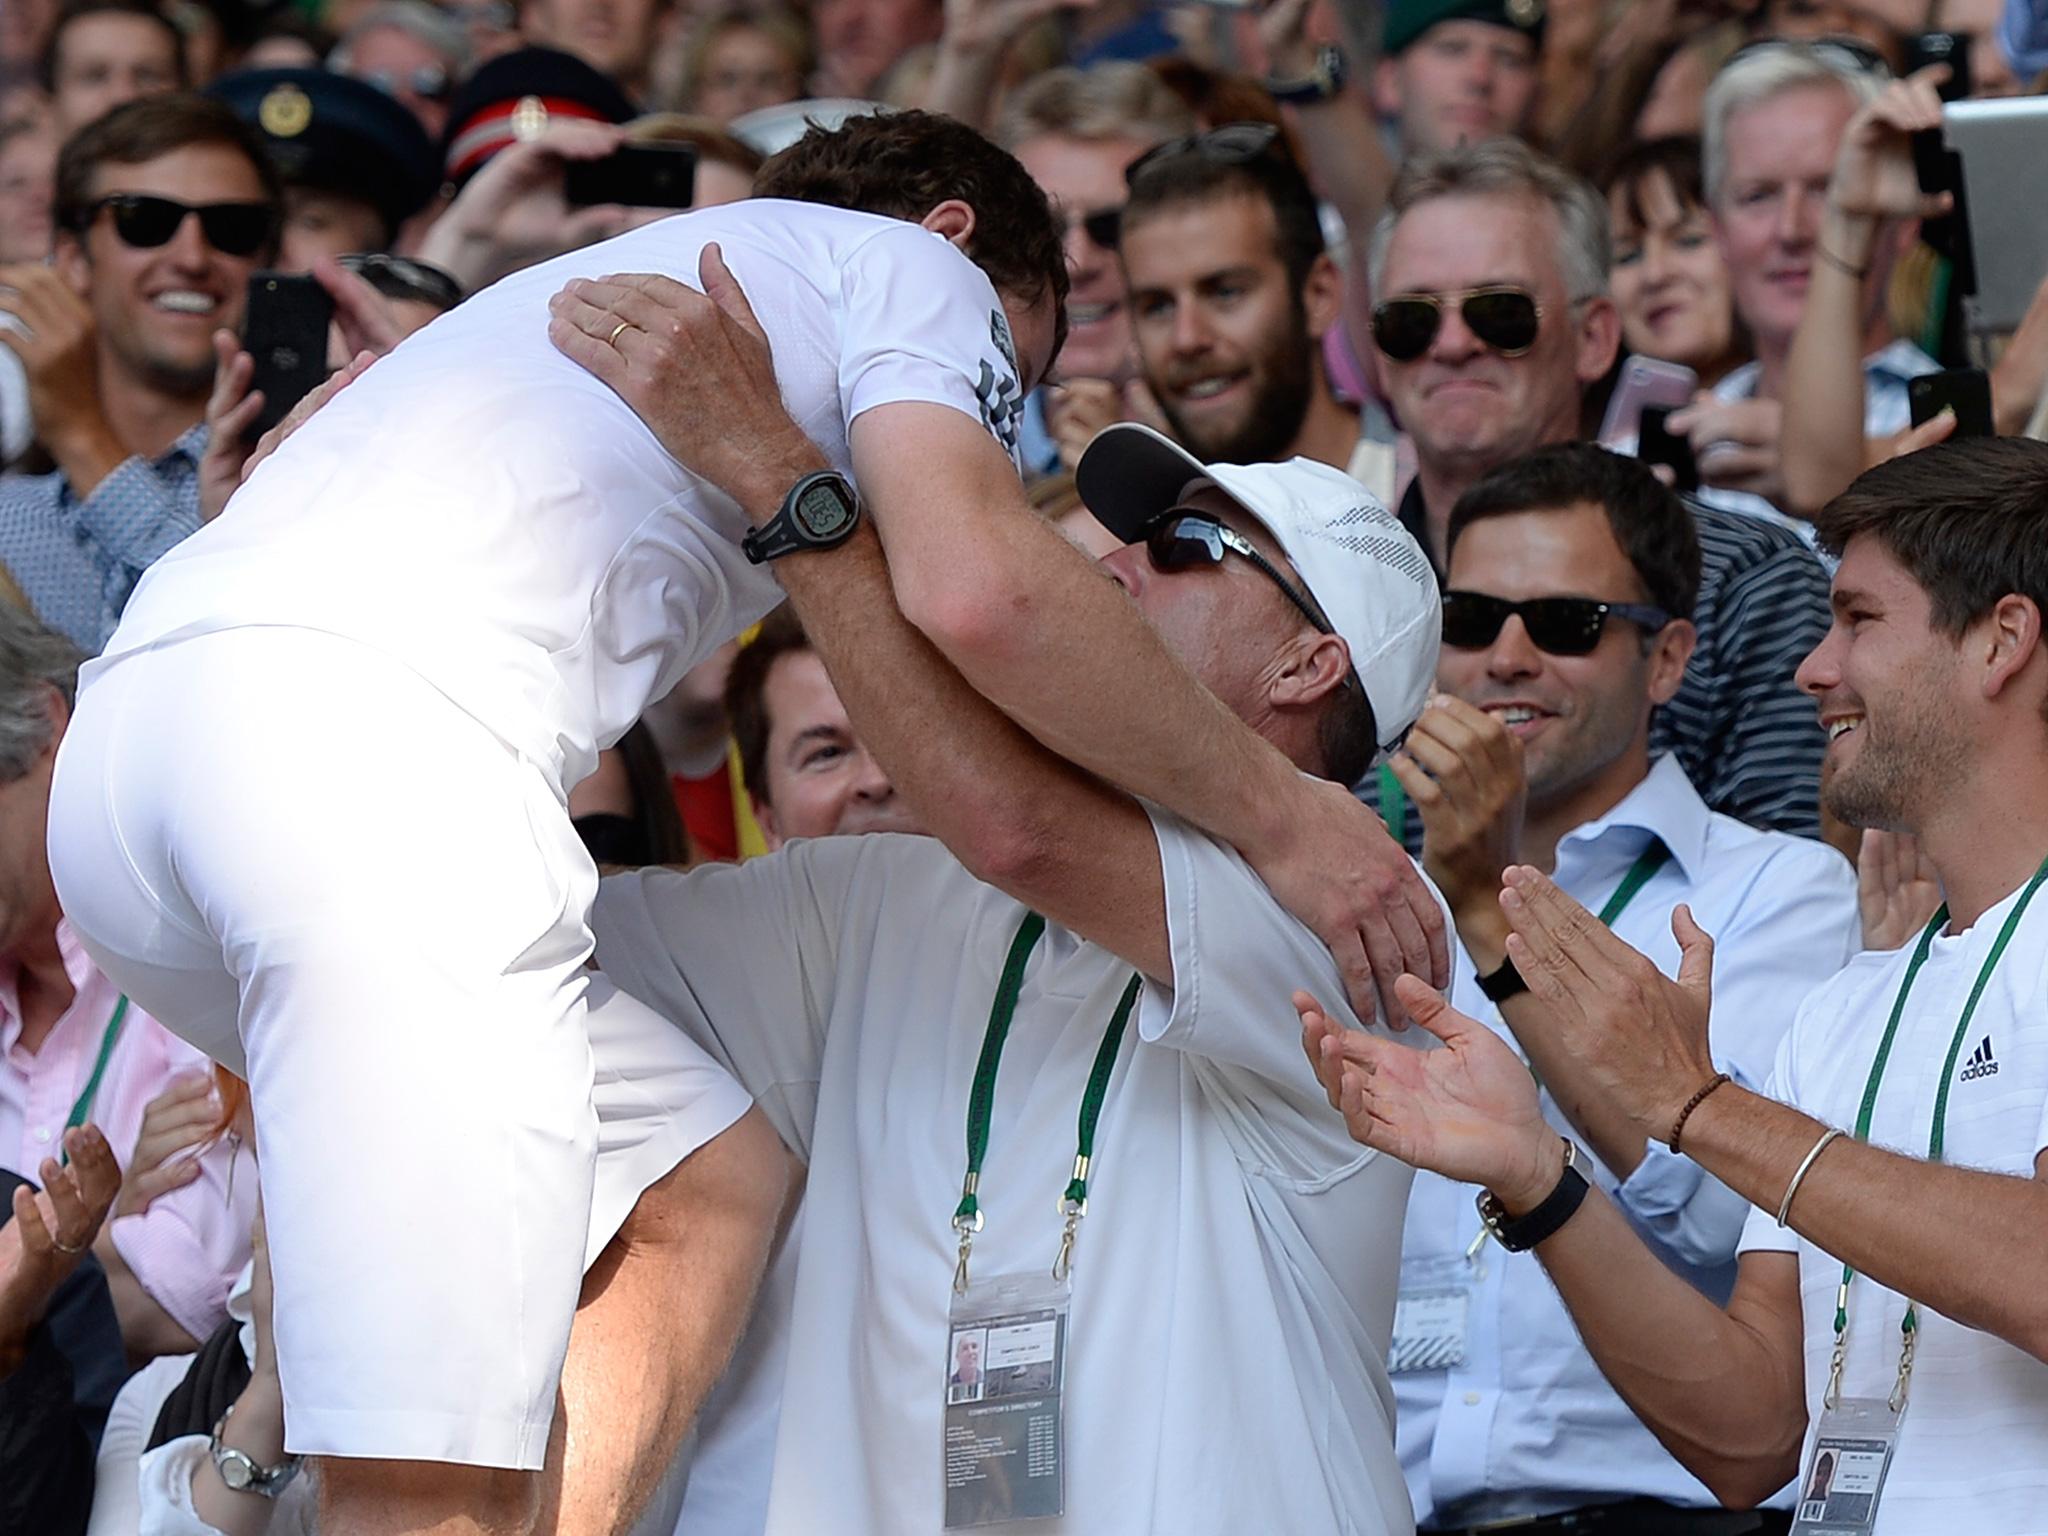 Murray and Lendl embraced after the Scot's 2013 Wimbledon win